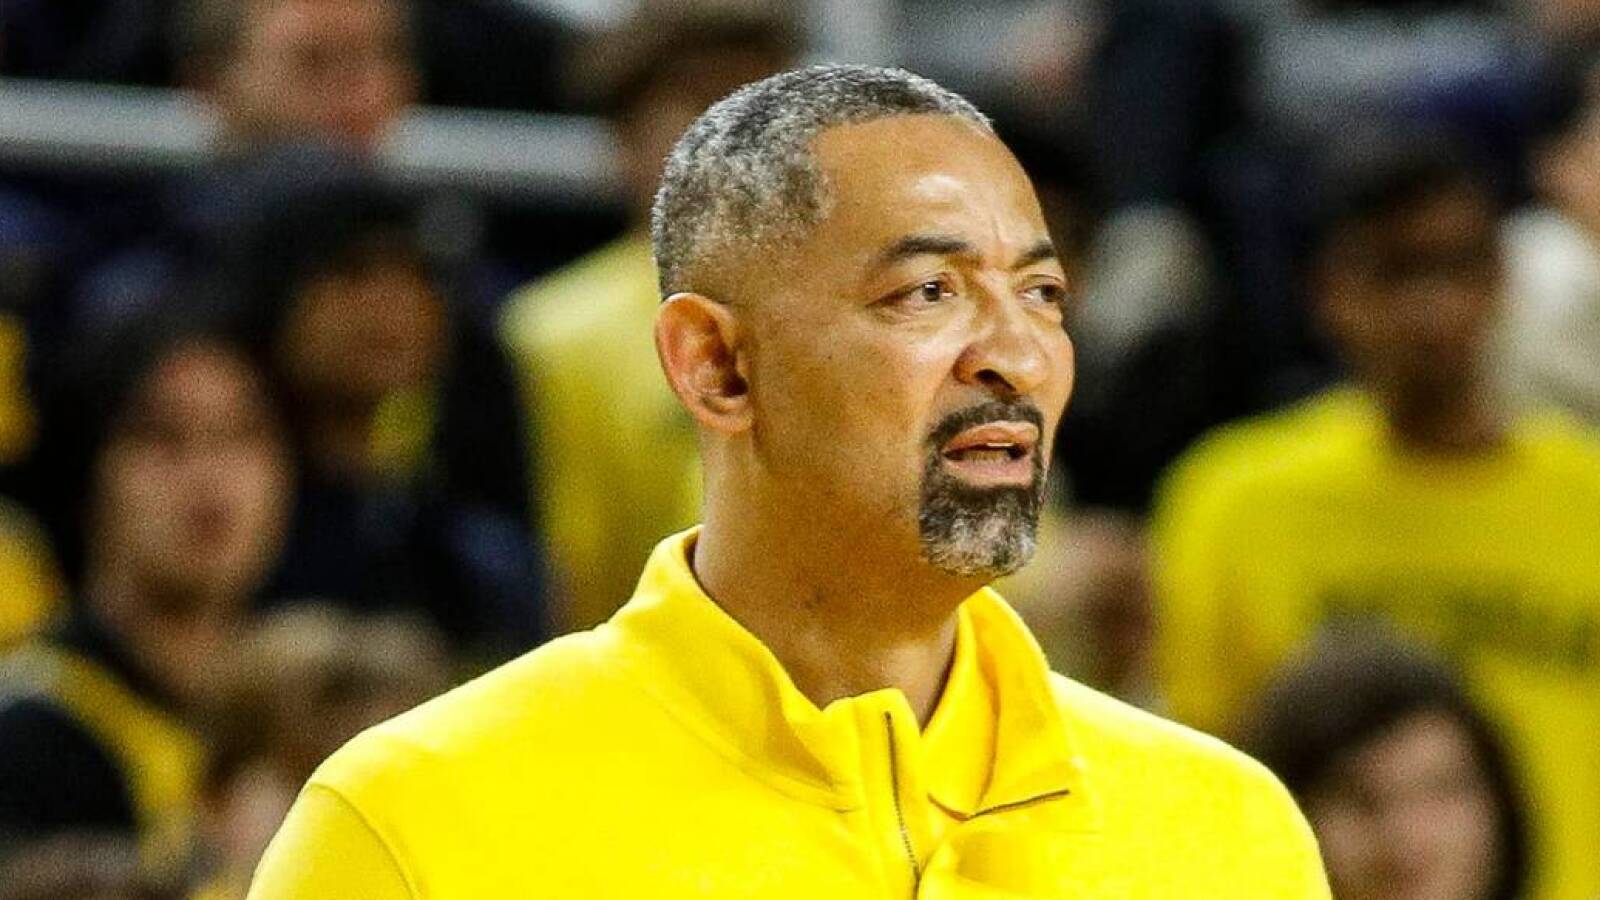 Juwan Howard returning to NBA as Eastern Conference assistant